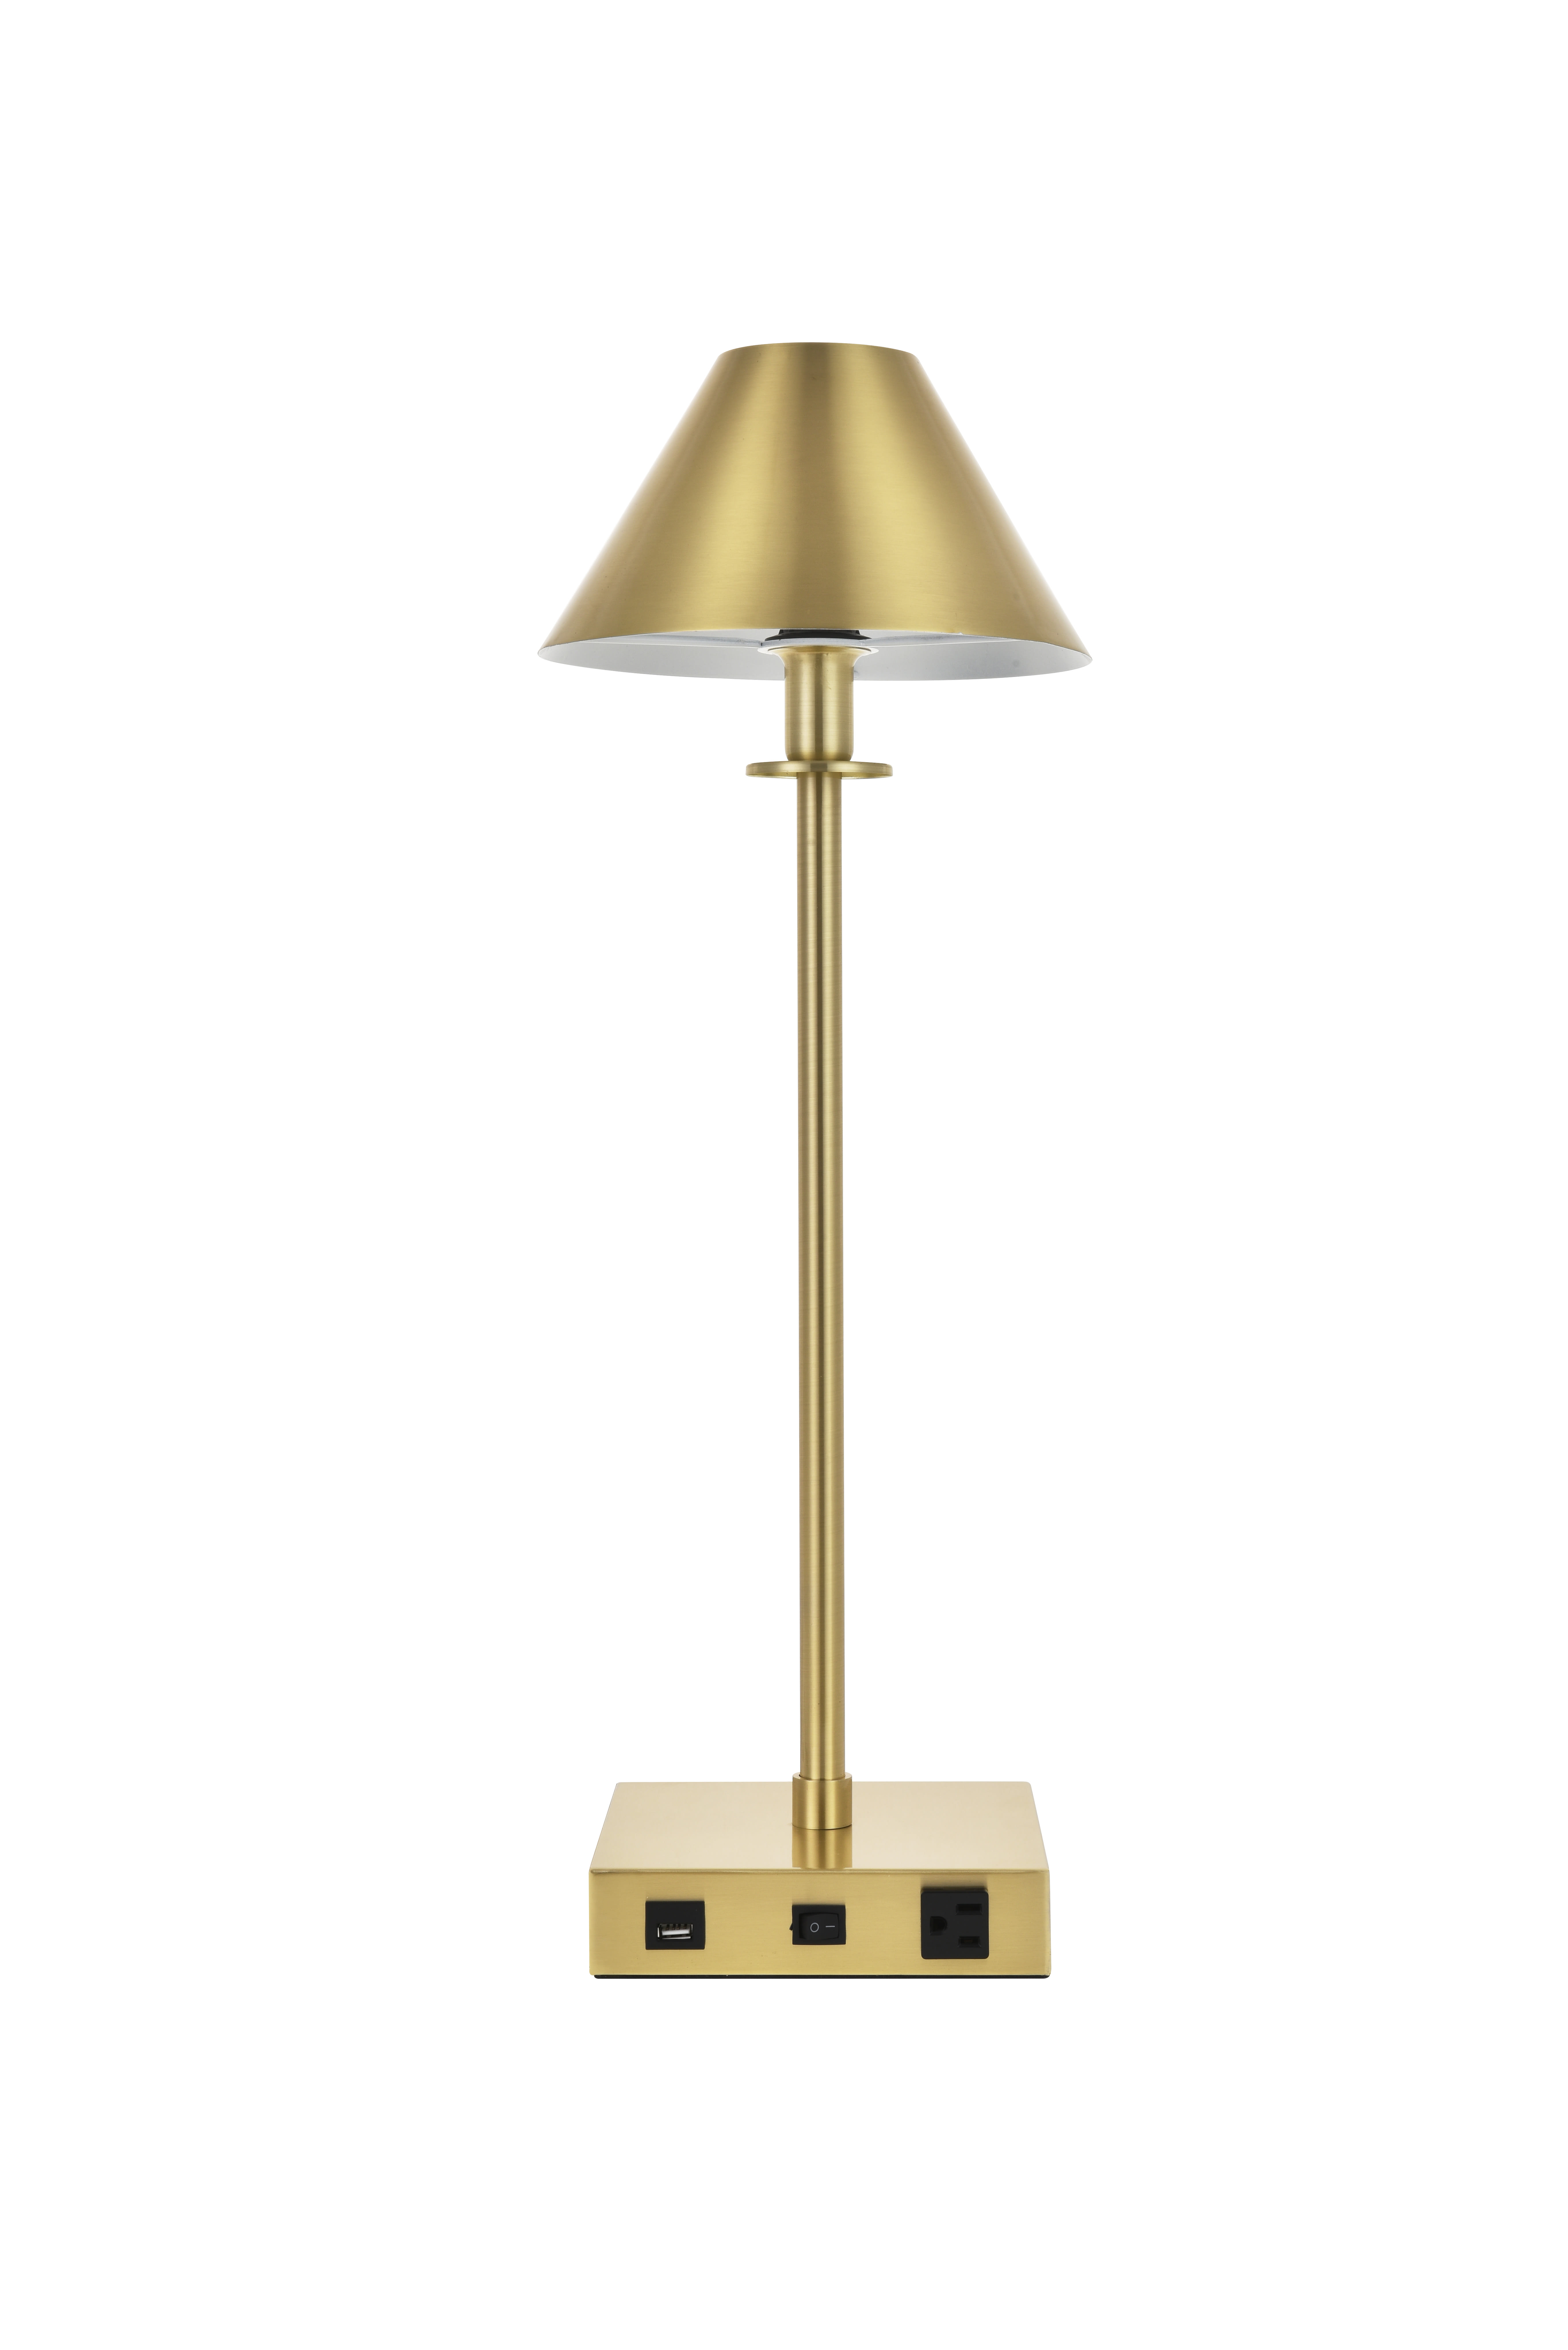 Elegant Lighting Tl3004 Brushed Brass, Tall Table Lamp With Usb Port